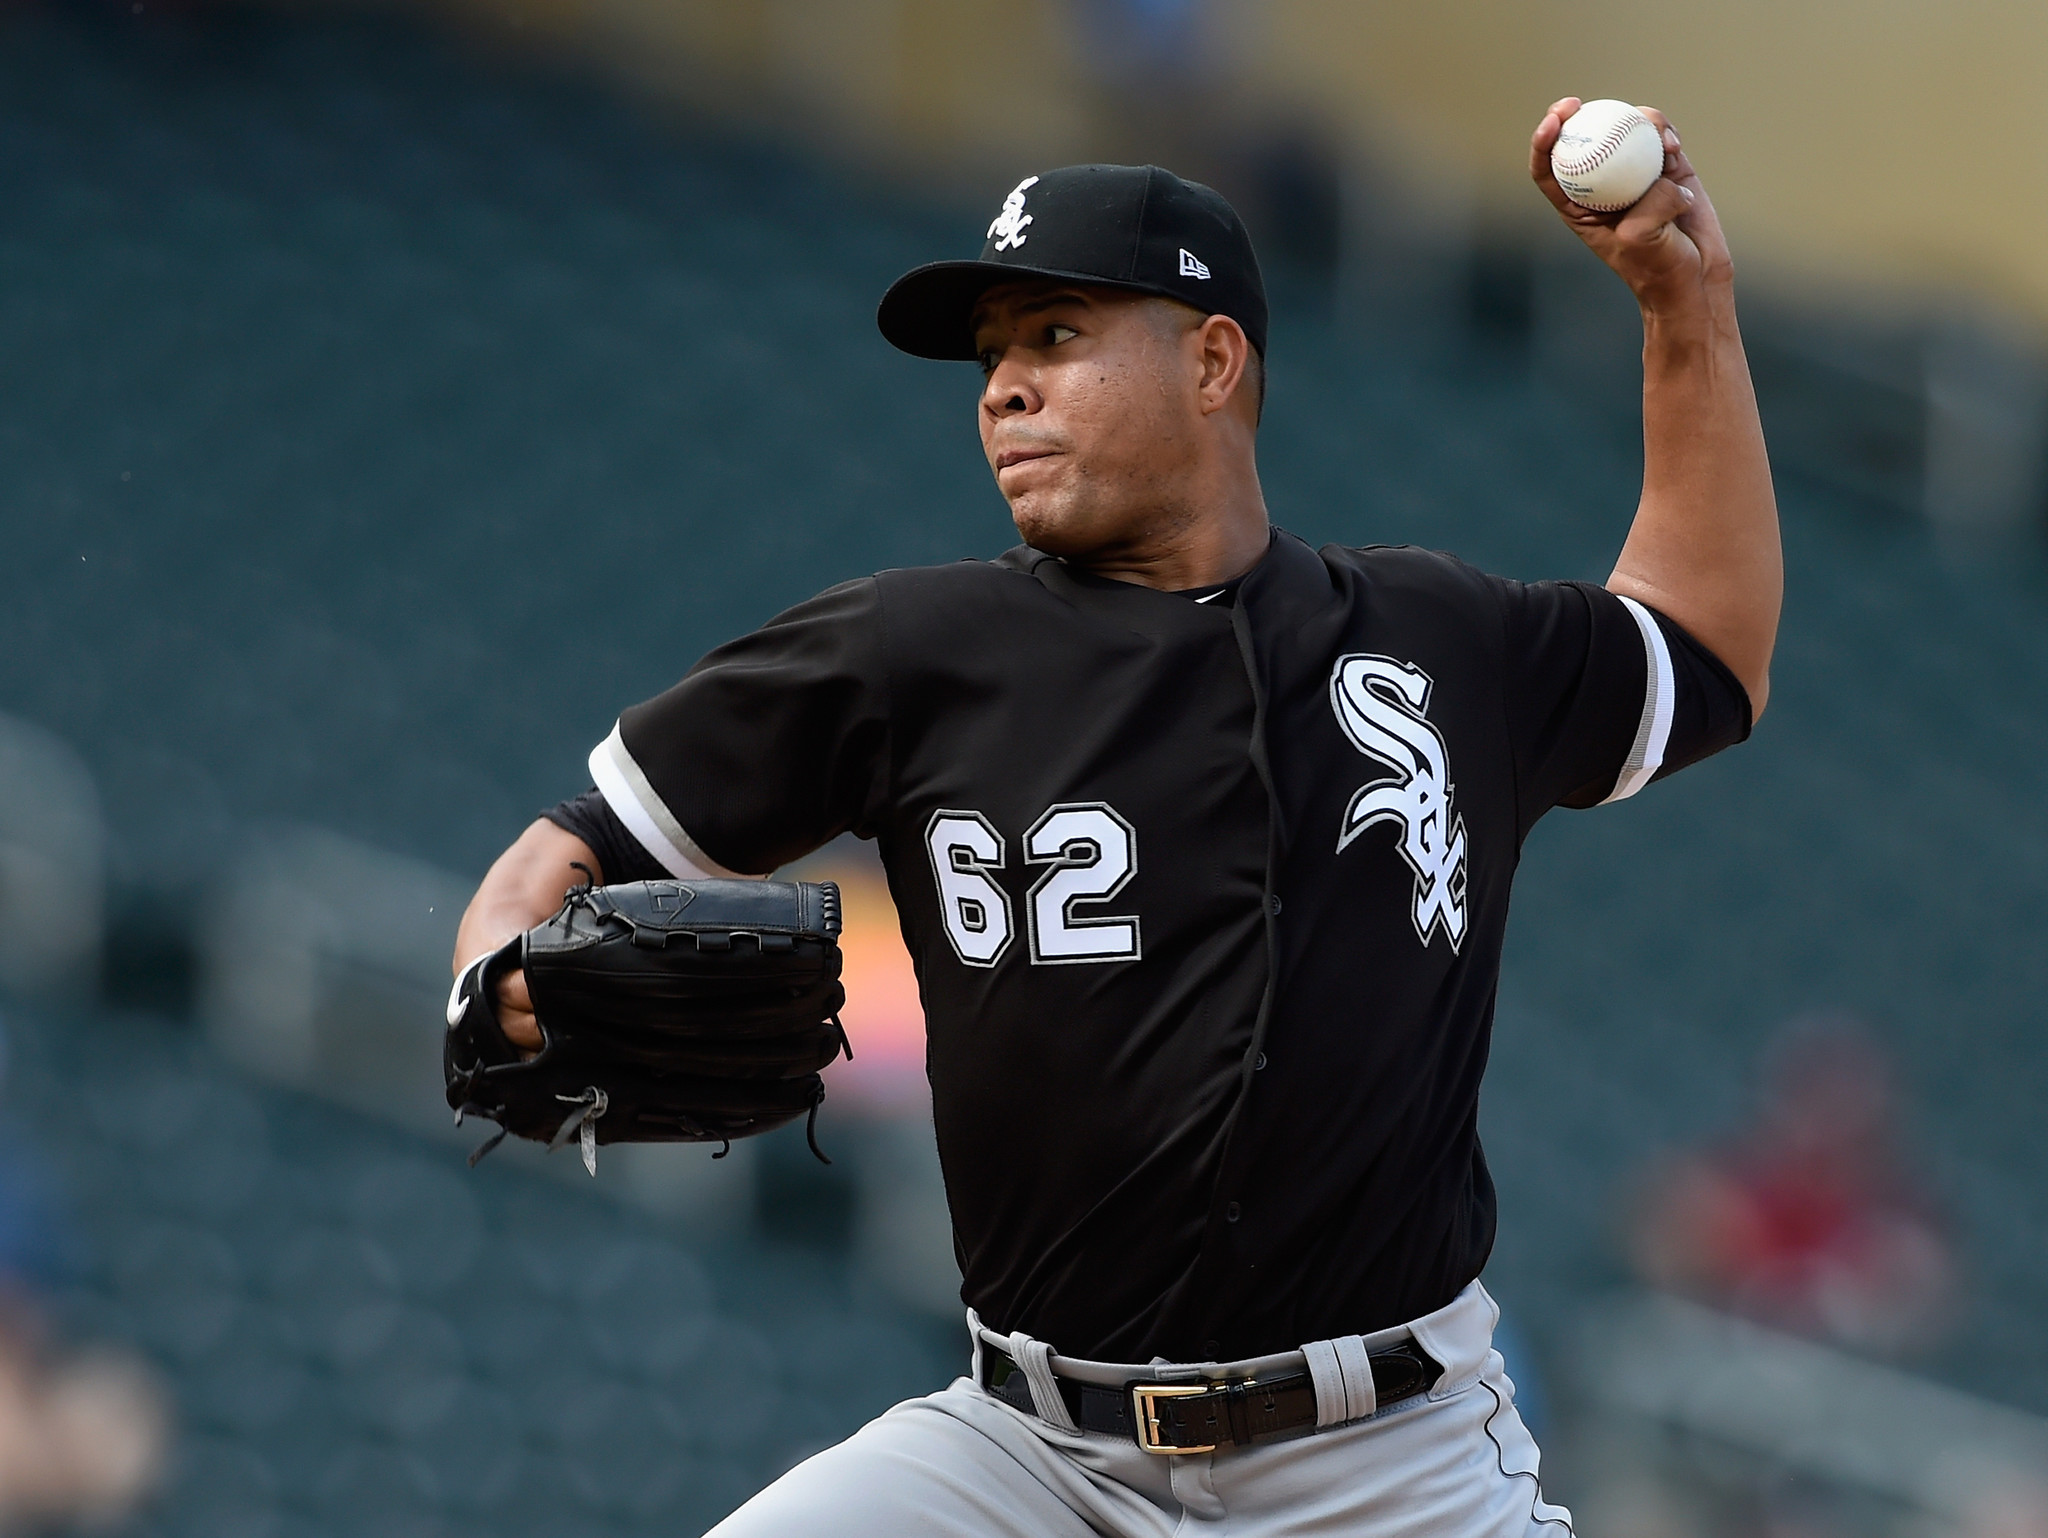 Record rain delay doesn't slow White Sox, Jose Quintana in 9-0 victory